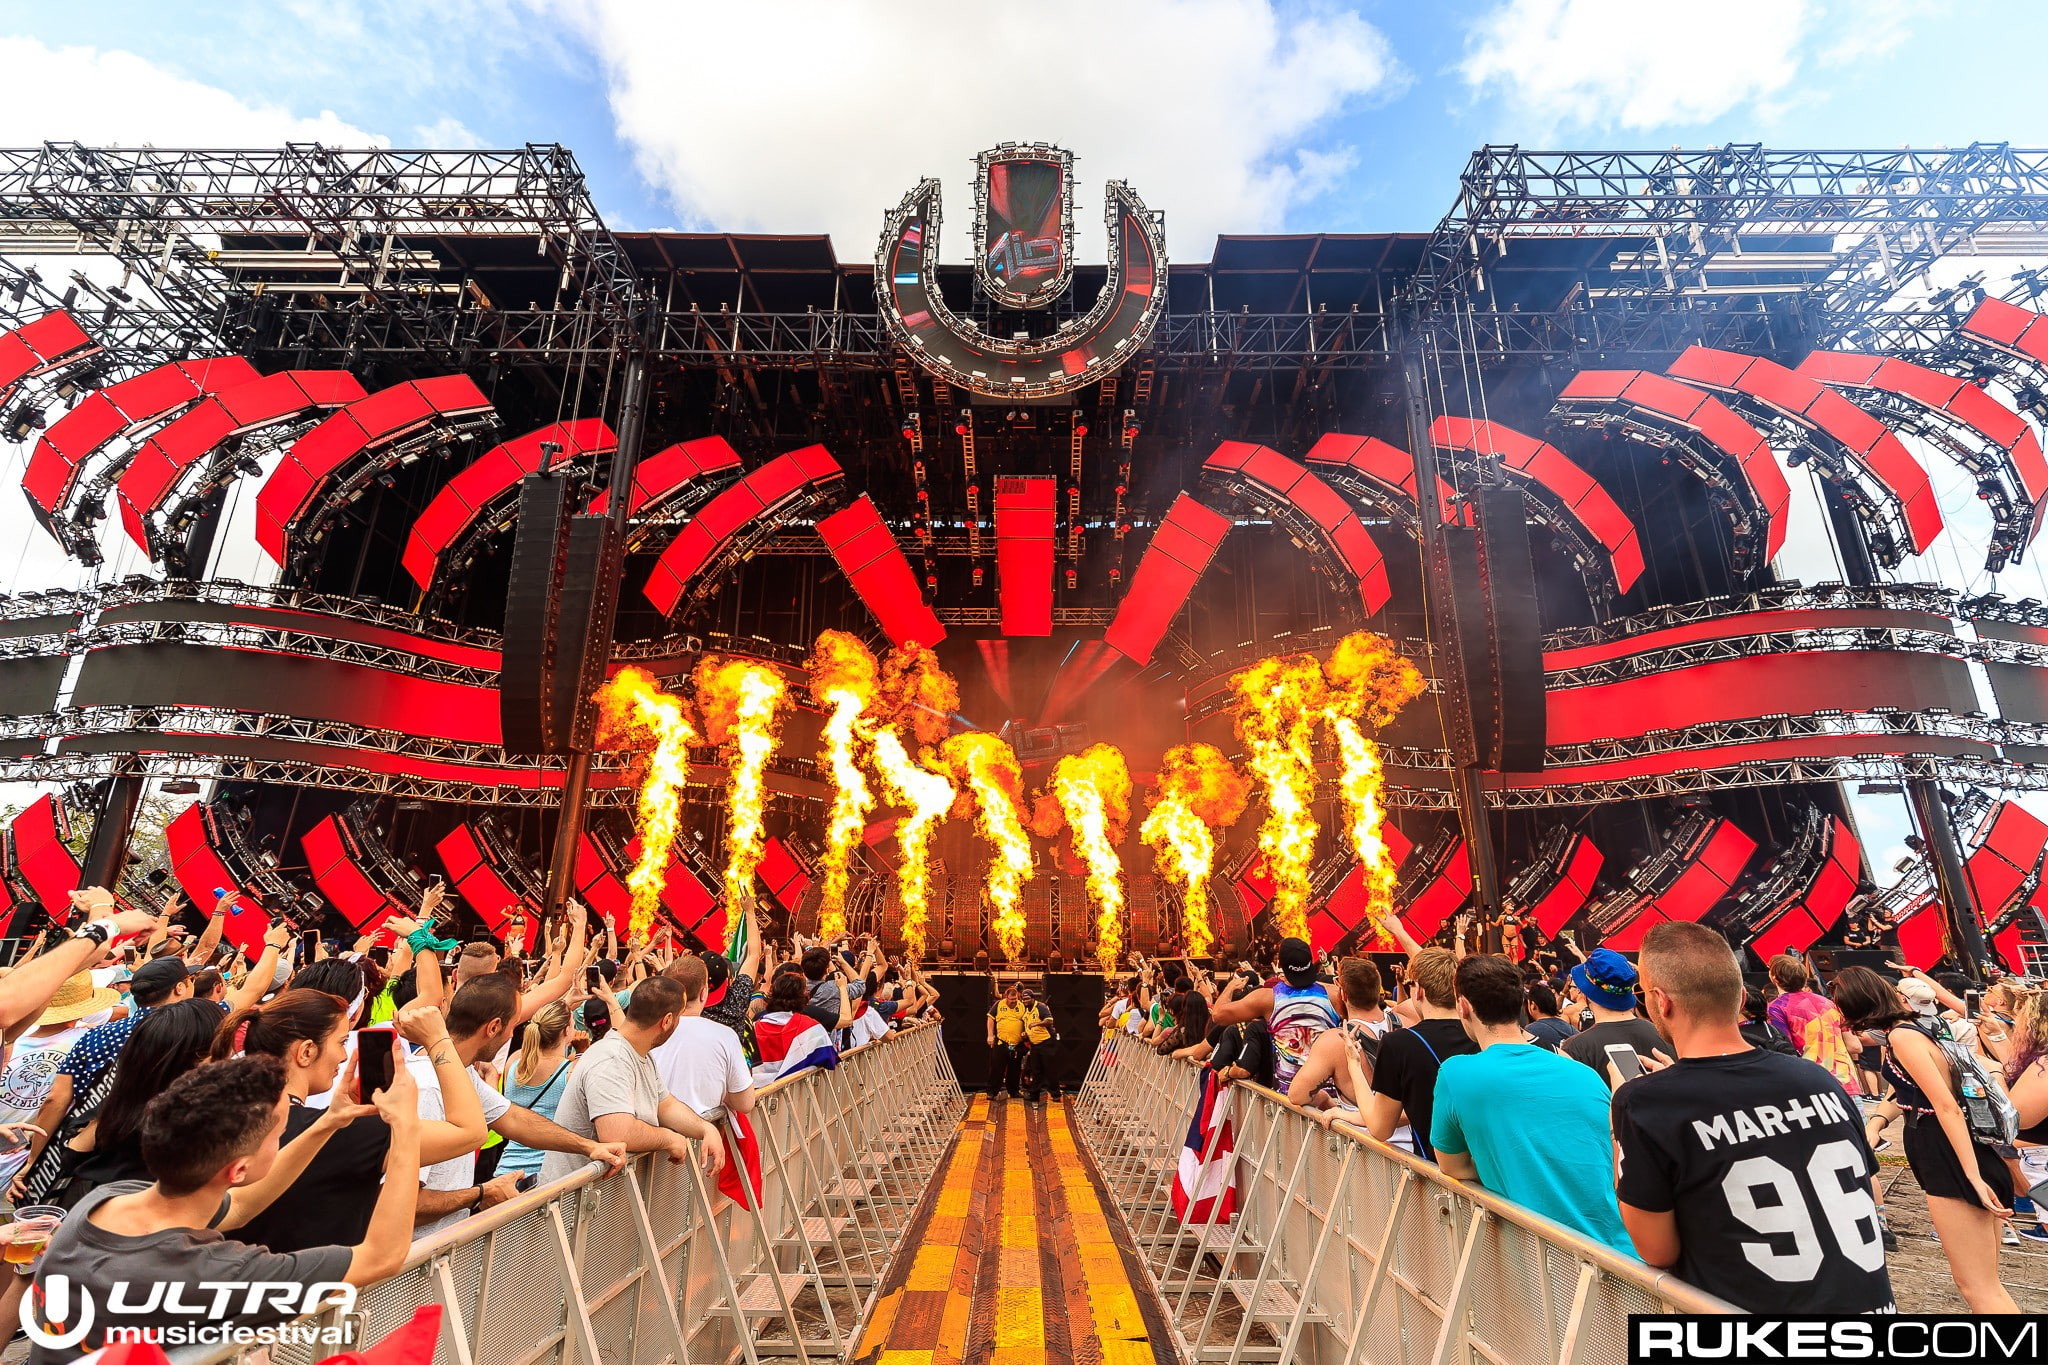 2048x1365 Ultra Music Festival, Rukes, stages, lights, photography, fire